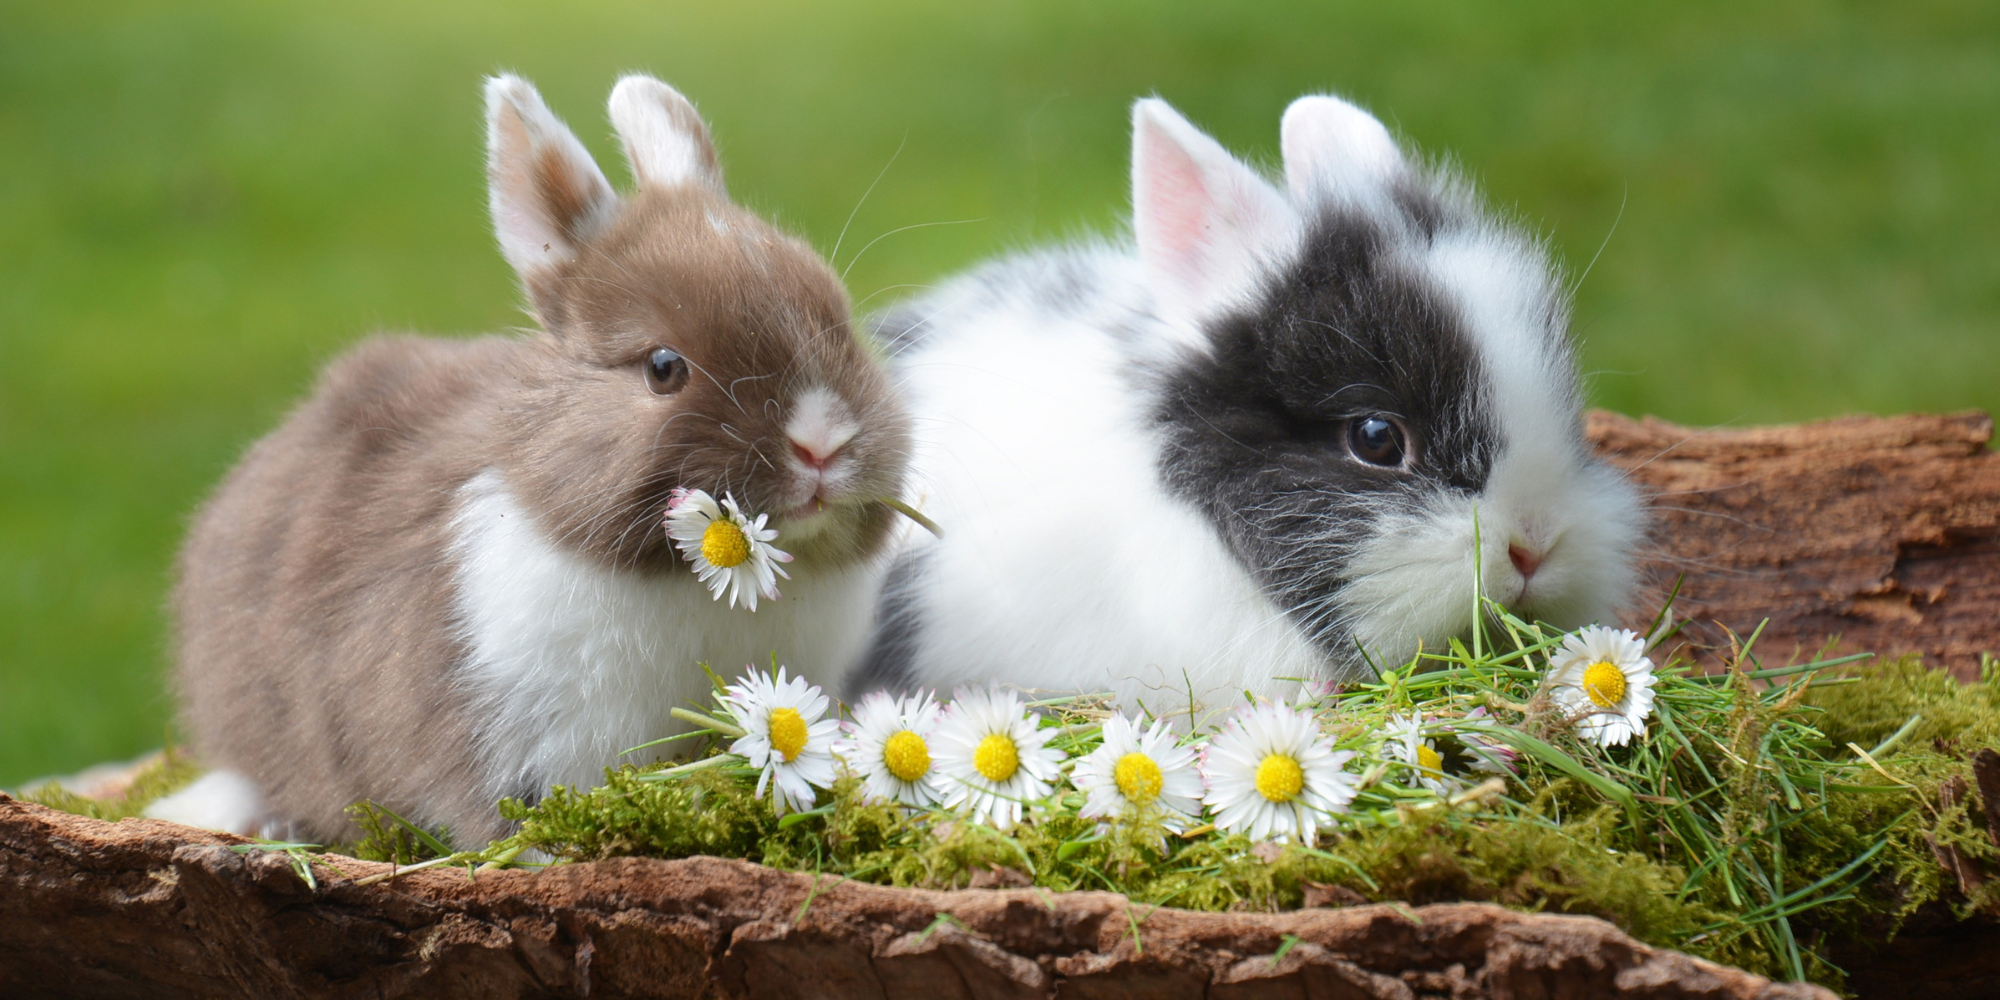 Two bunnies sitting in the grass and nibbling wild flowers.